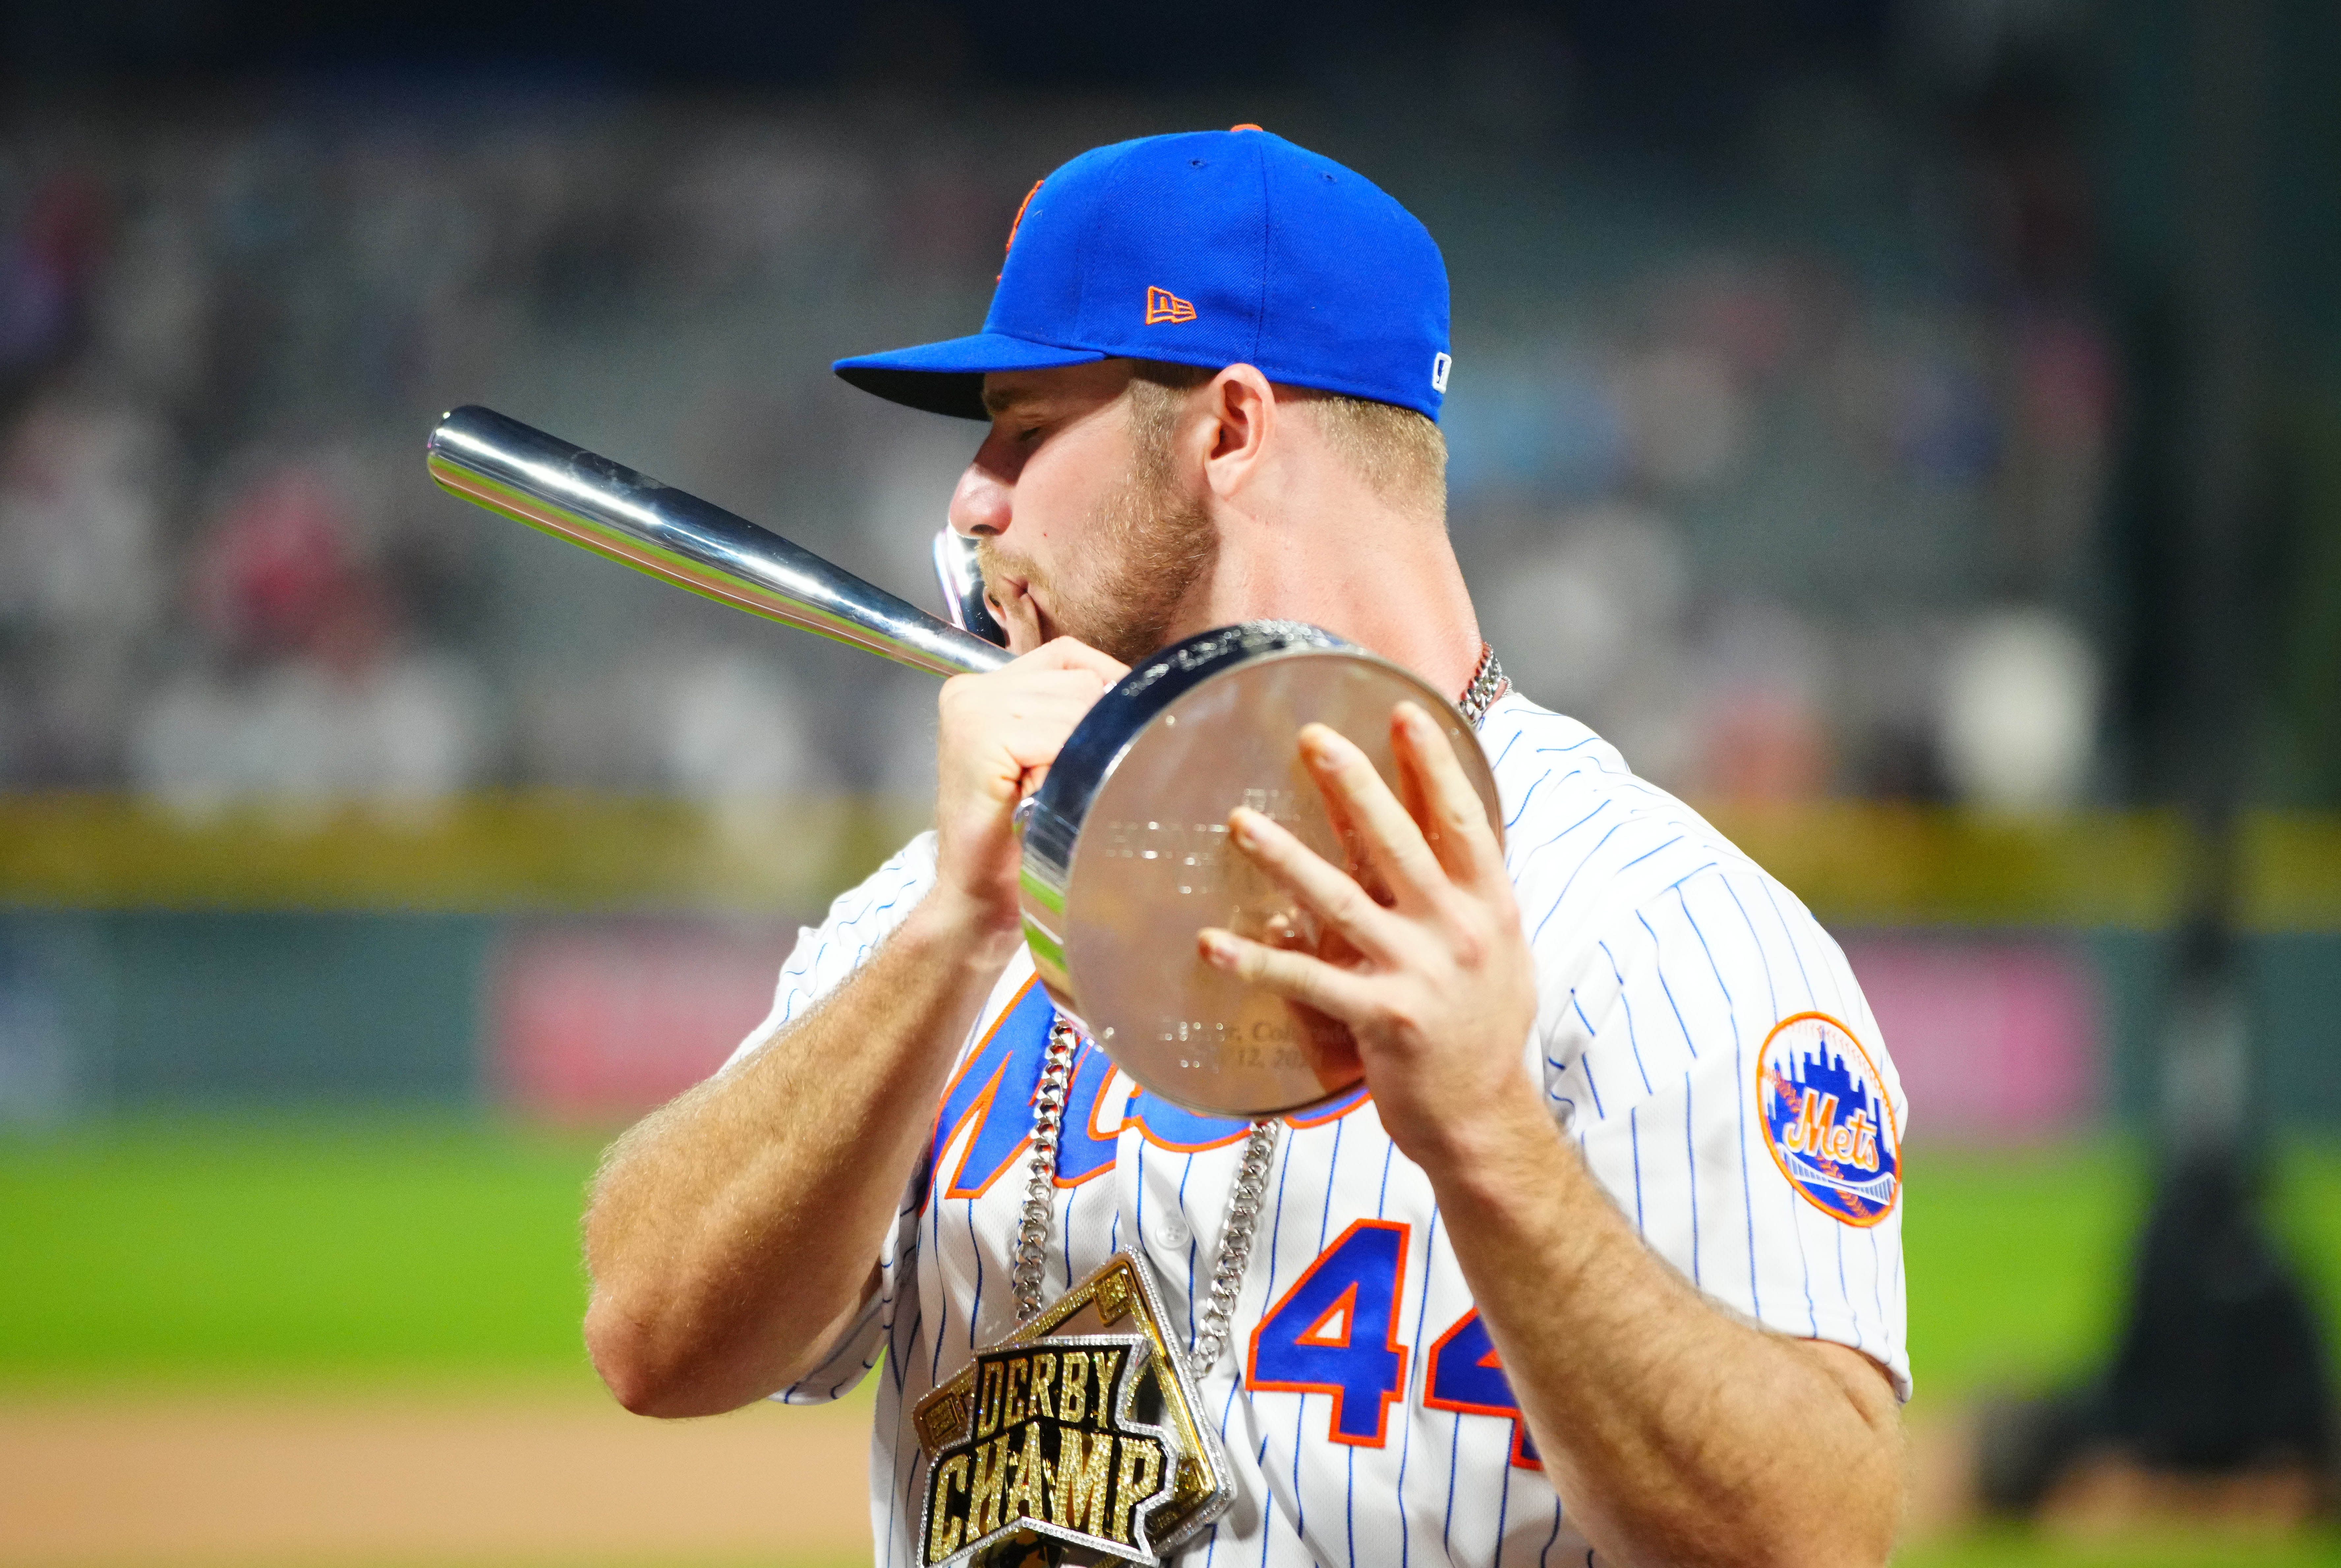 Former Gator Pete Alonso is not-so-quietly having a monster year